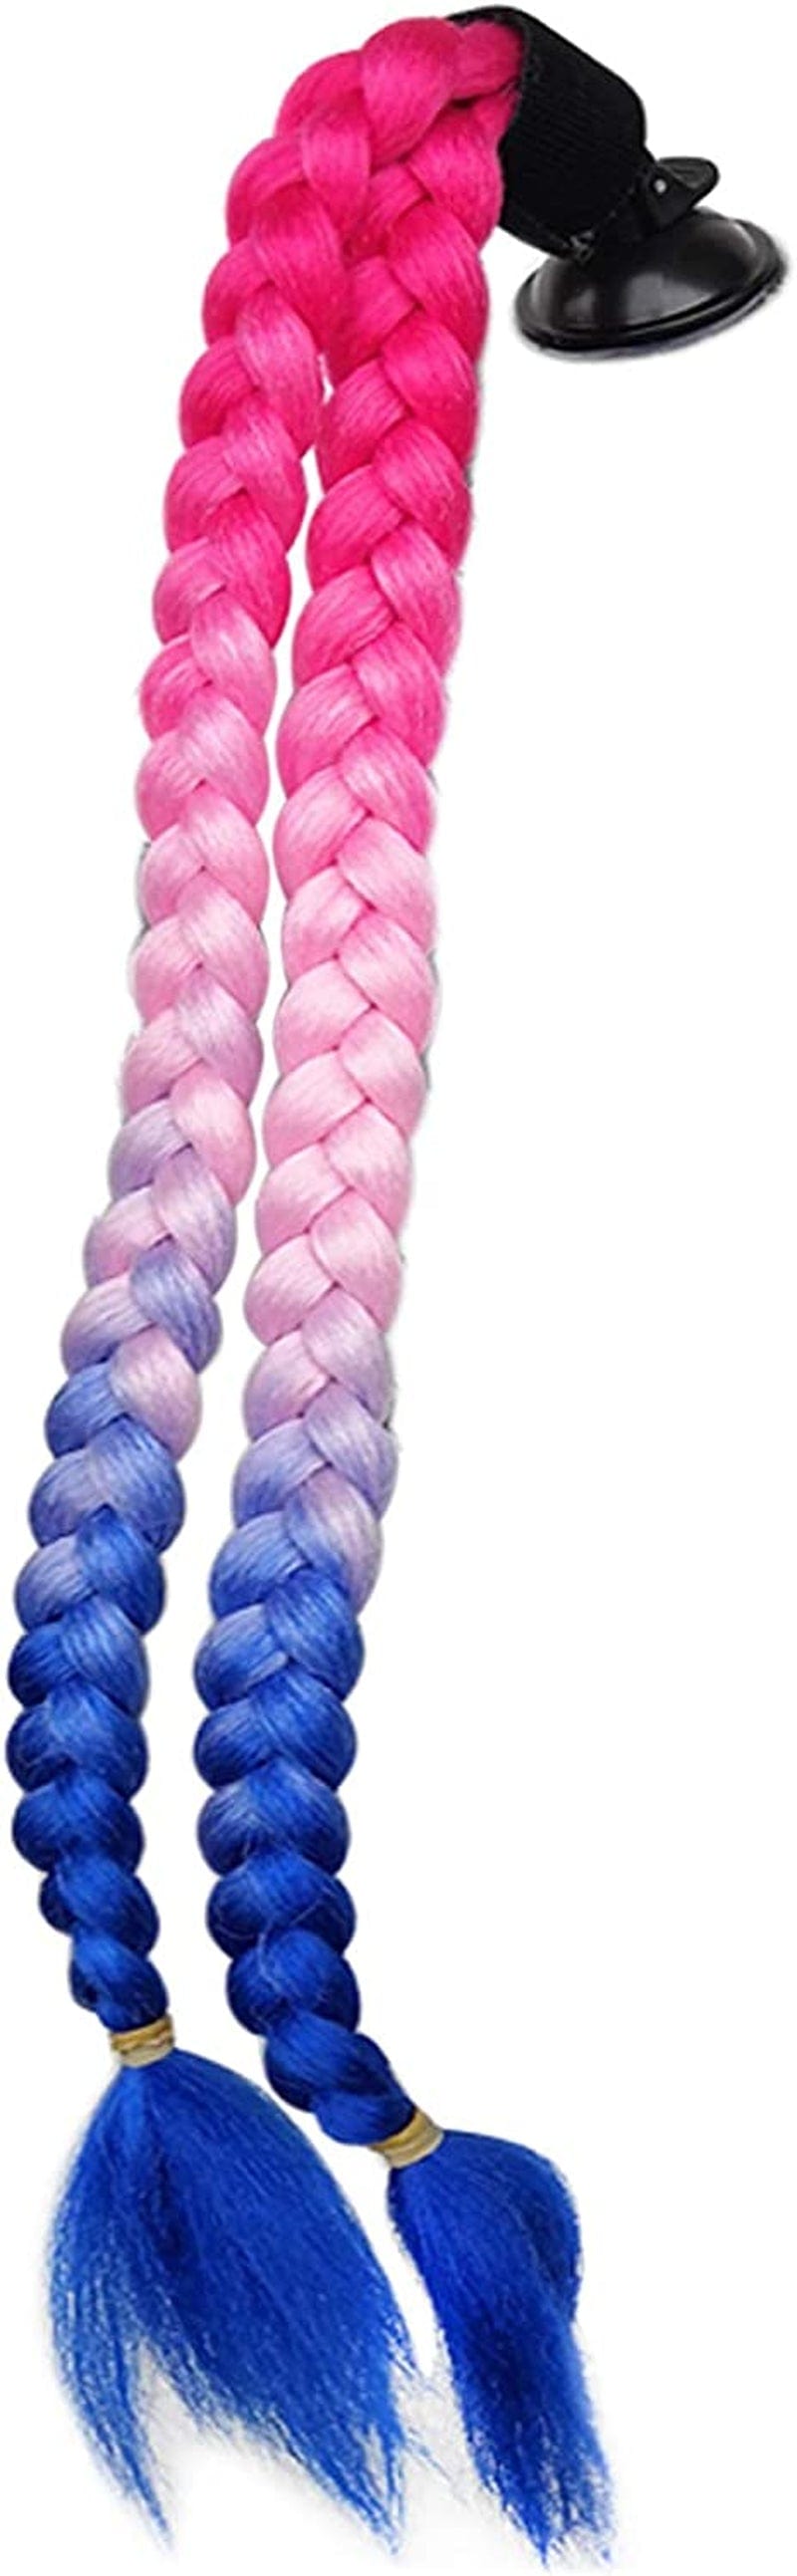 3T-SISTER Pigtails Accessory for Helmet Pigtails Ponytail Braids Hair for Motorcycle Bicycle Batting Skate Helmet or Other Helmets 2 Braids Together 24Inch /Many Colors (Helmet Not Included) Sporting Goods > Outdoor Recreation > Cycling > Cycling Apparel & Accessories > Bicycle Helmets 3T-SISTER Blue  